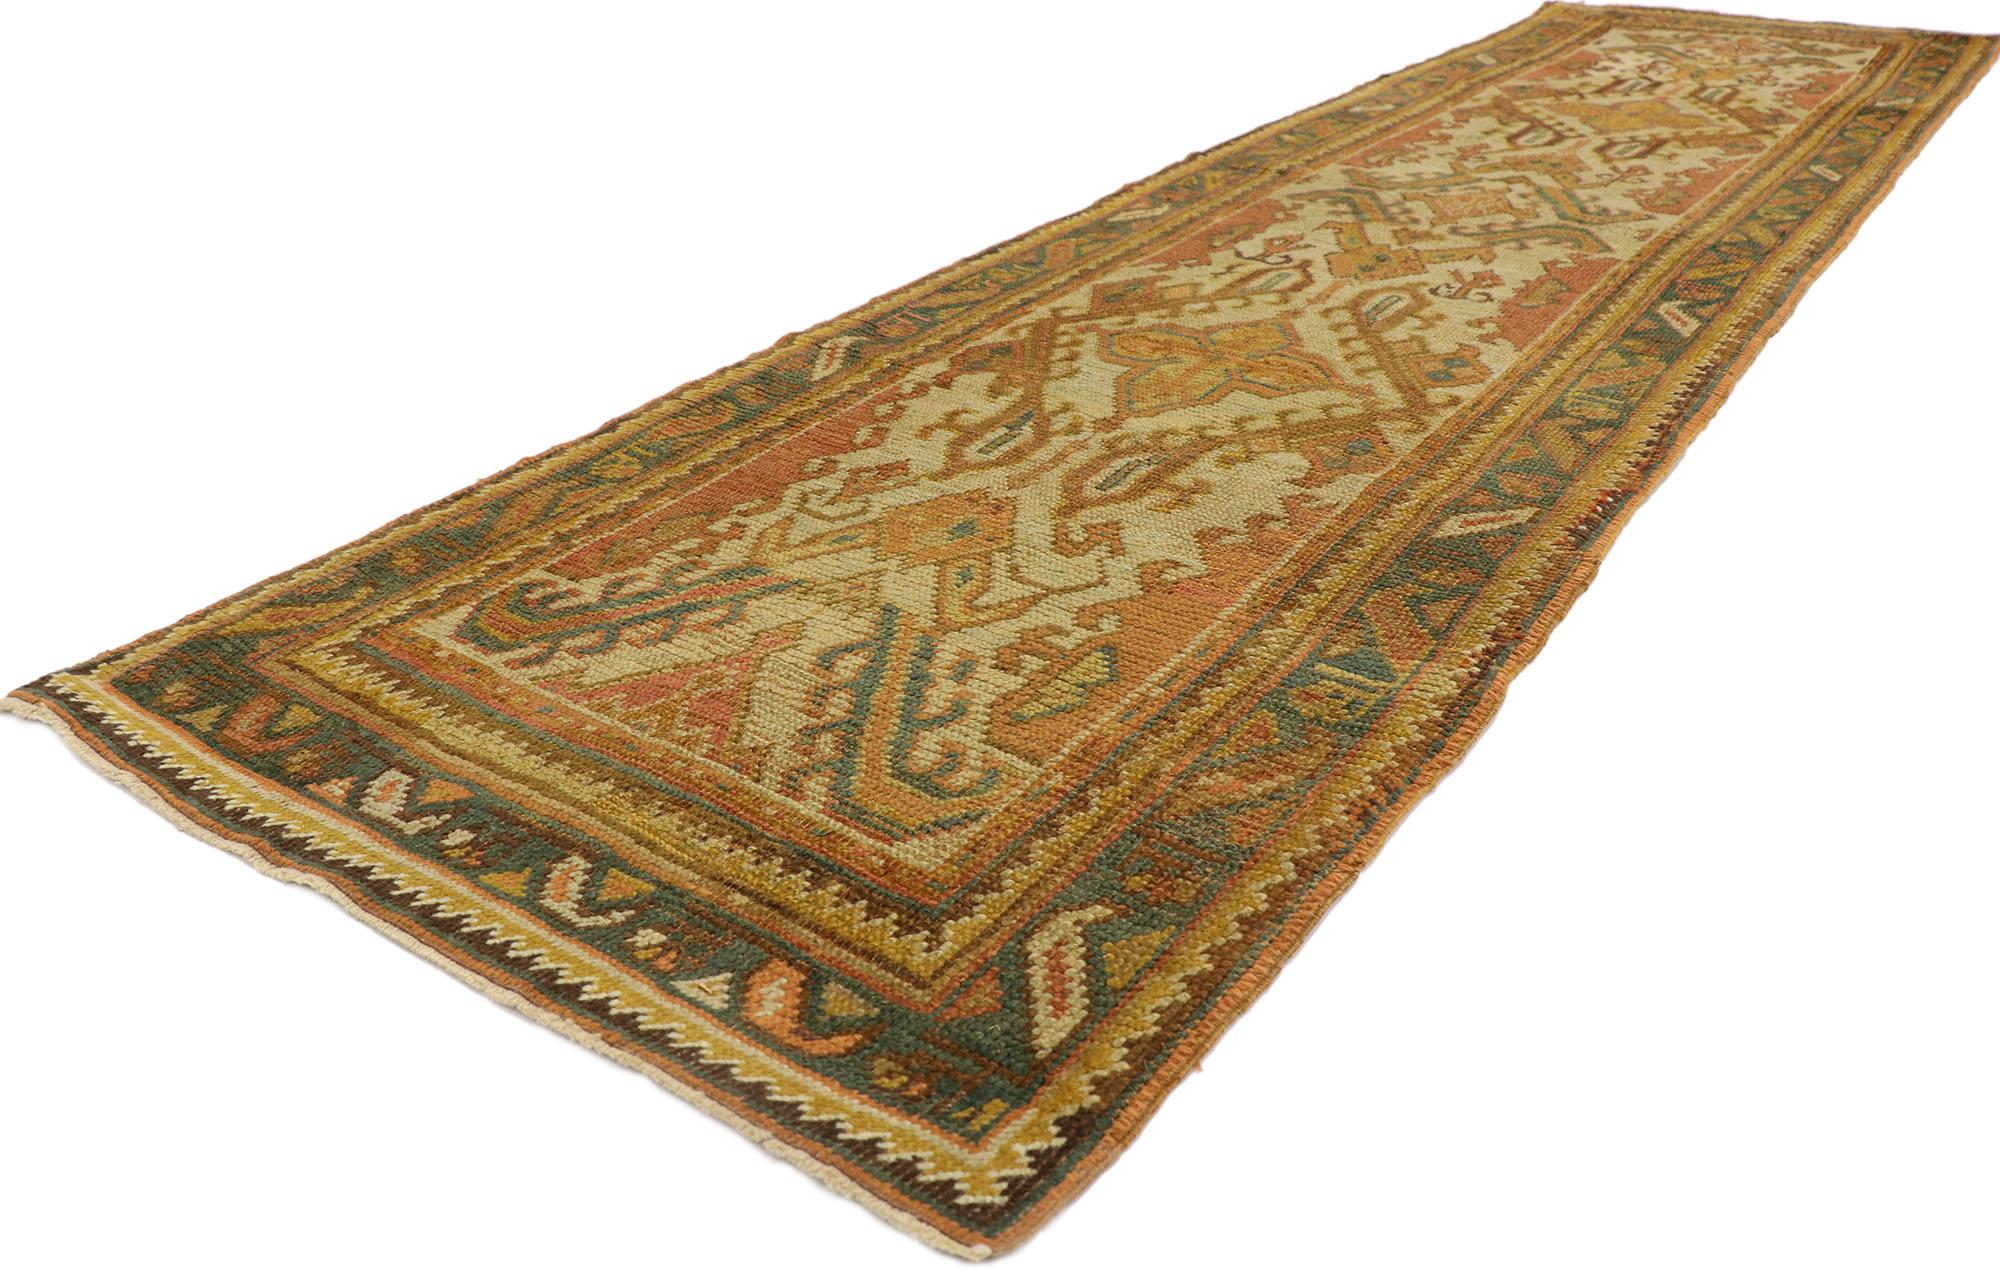 ​53669 Antique Turkish Oushak Rug, 02'11 x 11'03.
Step into a world of timeless beauty and Mediterranean flair with this hand knotted wool antique Turkish Oushak rug runner. The intricate botanical designs and striking colors offer a stunning blend